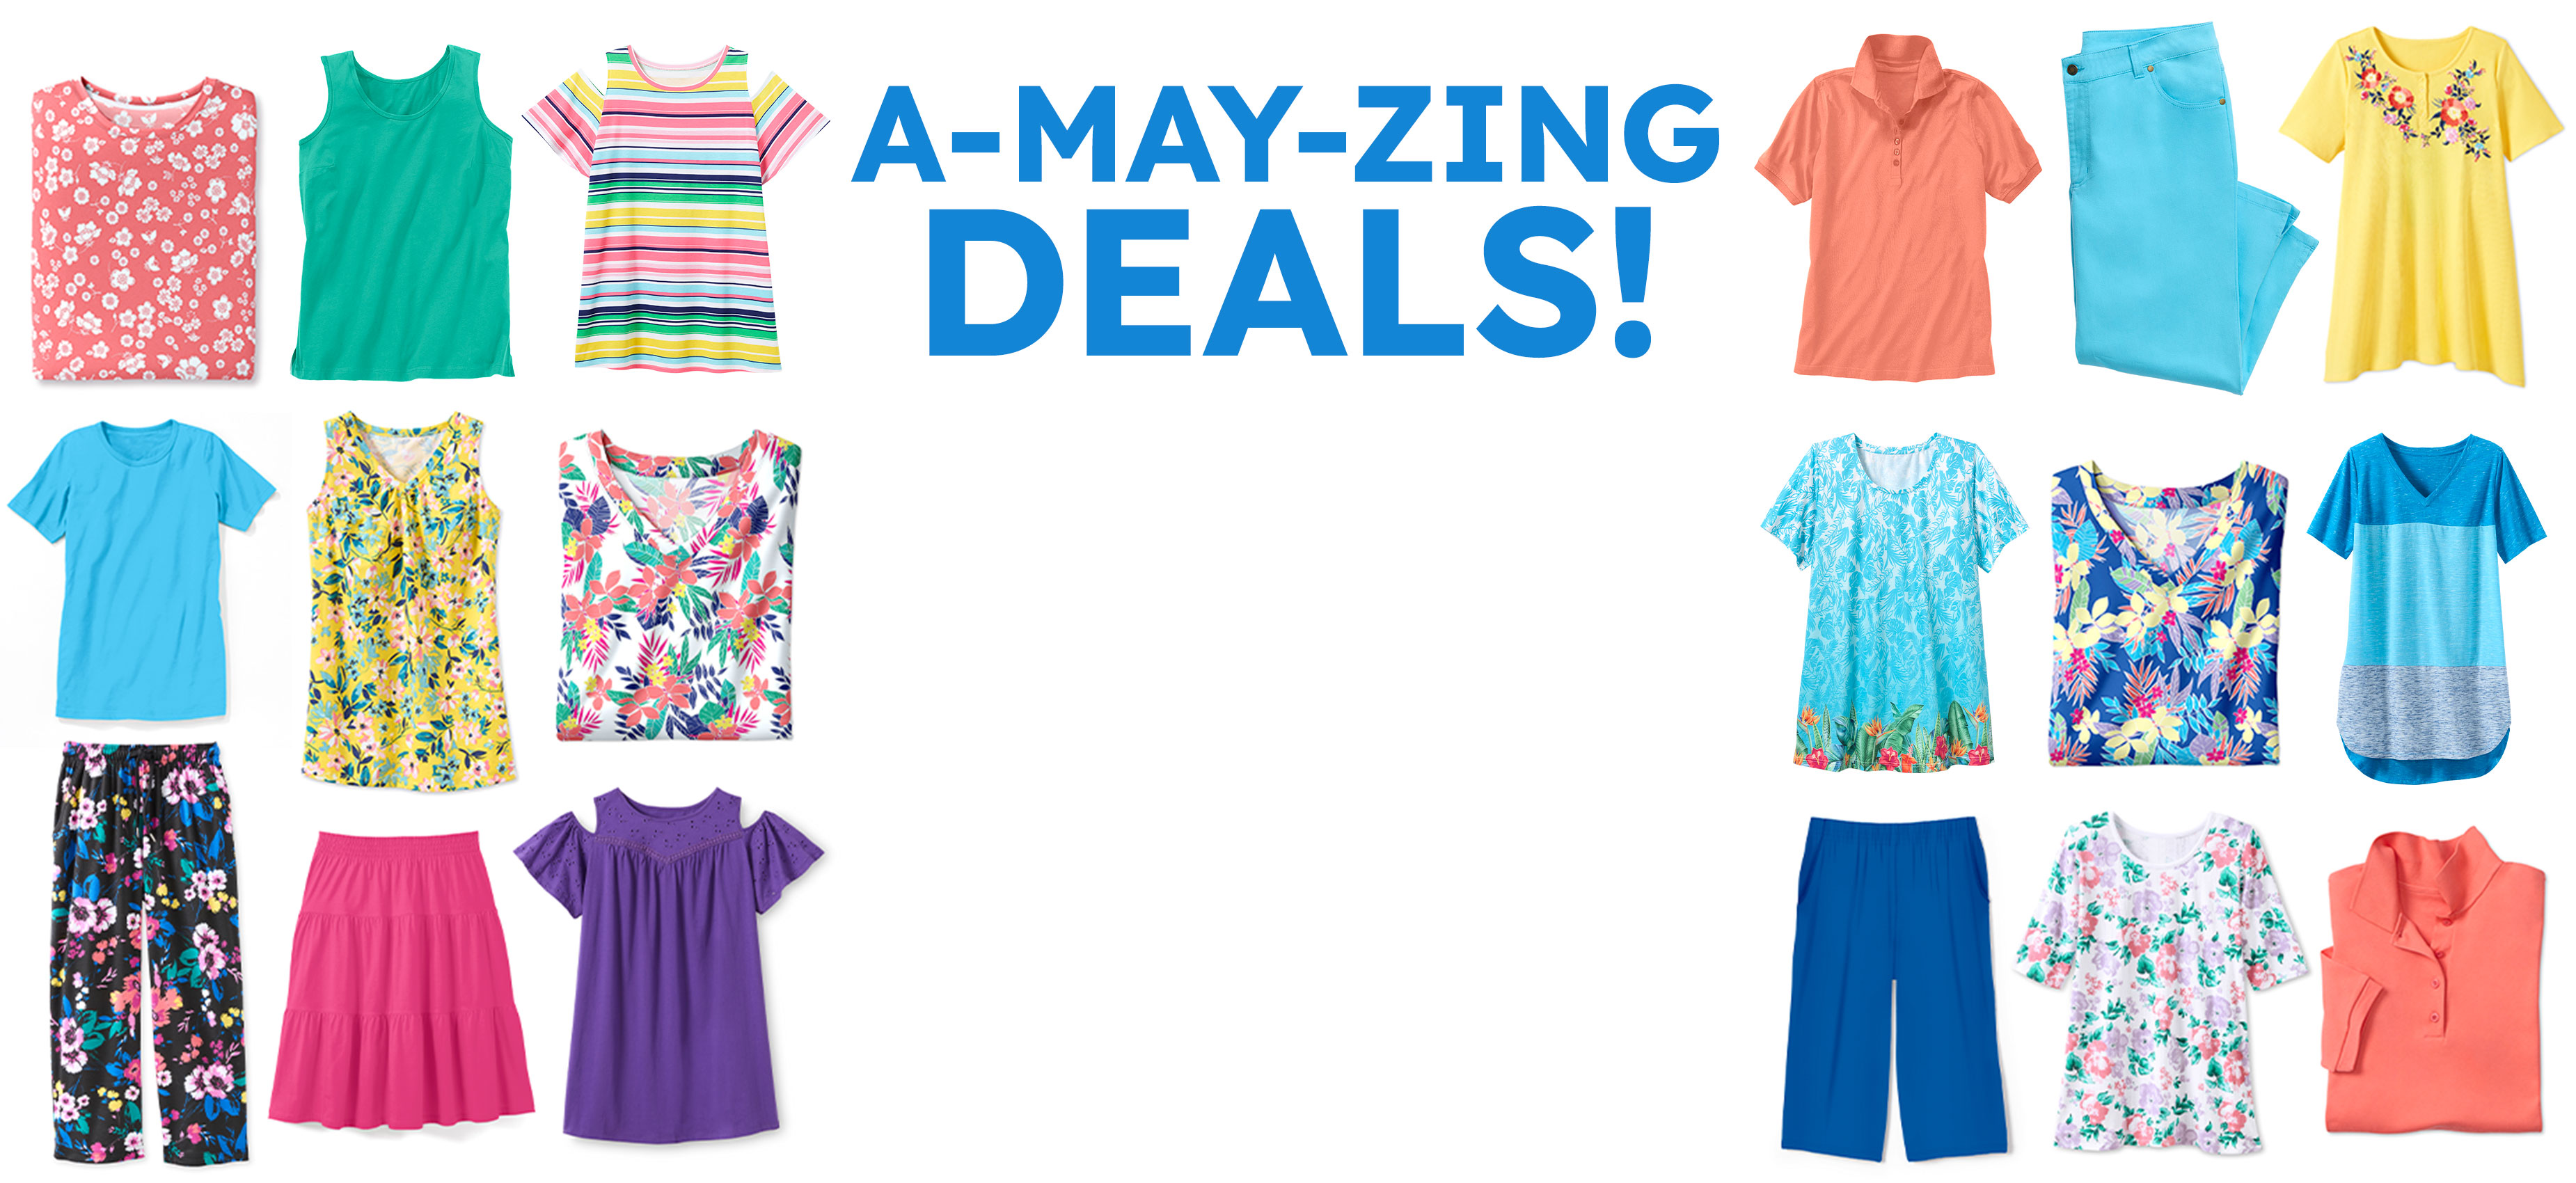 A-MAY-ZING Deals! bottoms from 40 %off Shop tops bottoms, from $9.99 Shop tops